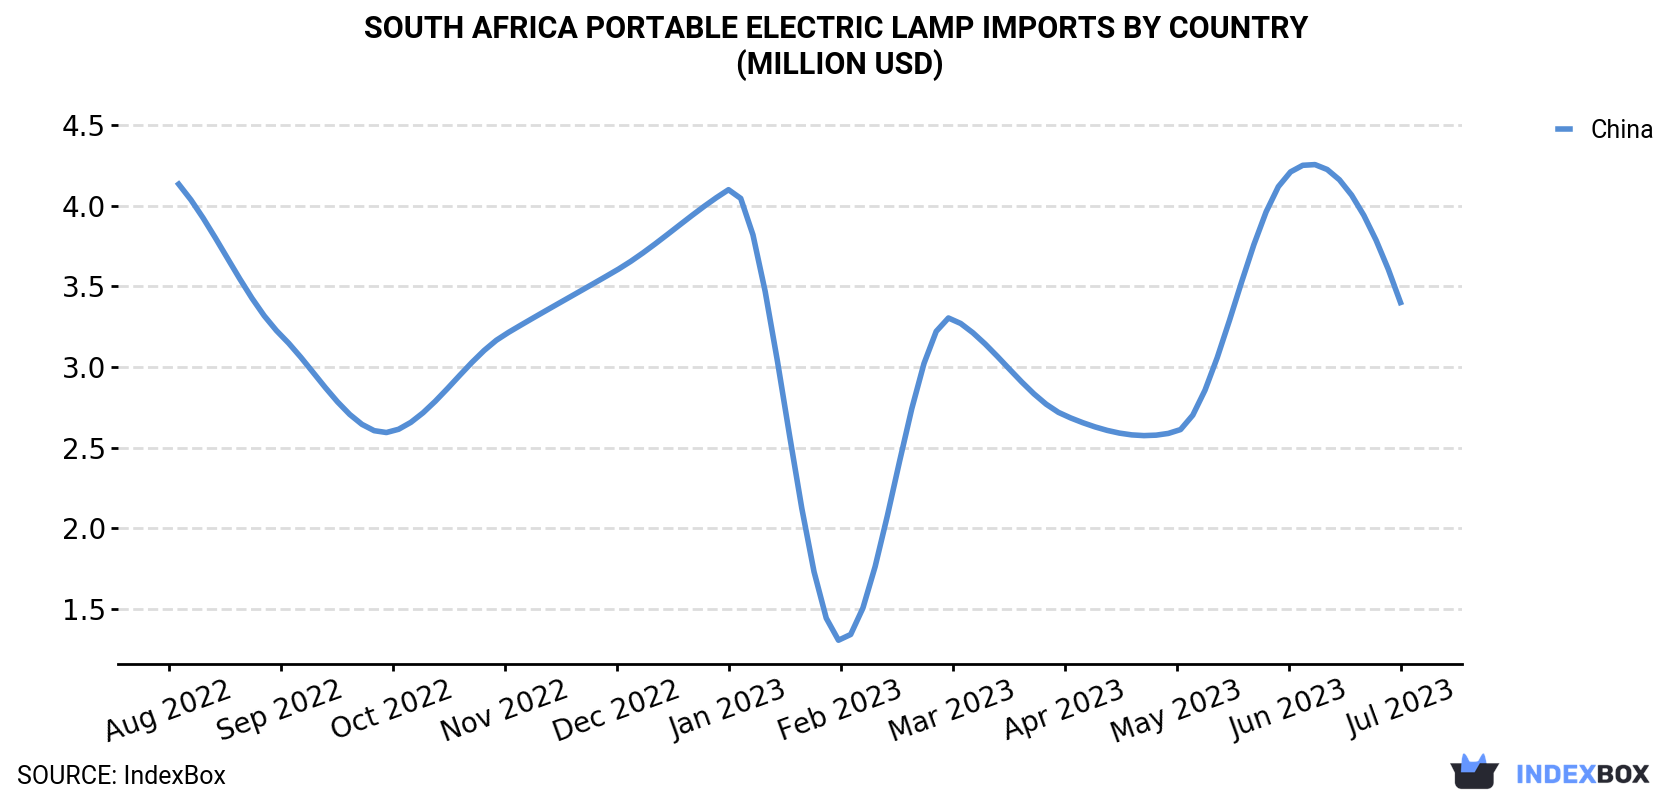 South Africa Portable Electric Lamp Imports By Country (Million USD)